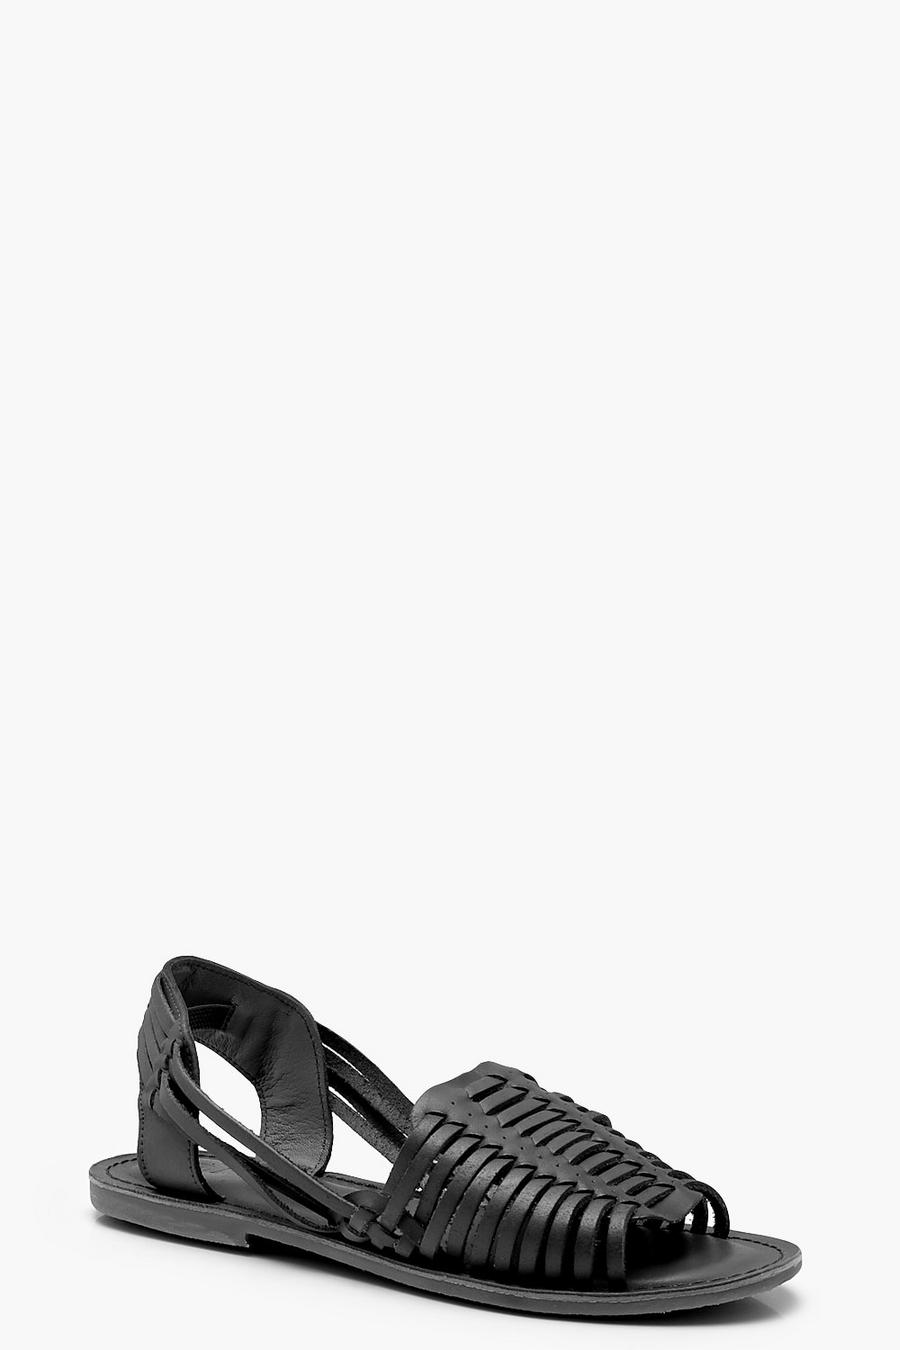 Leather Woven Sandals, Black image number 1